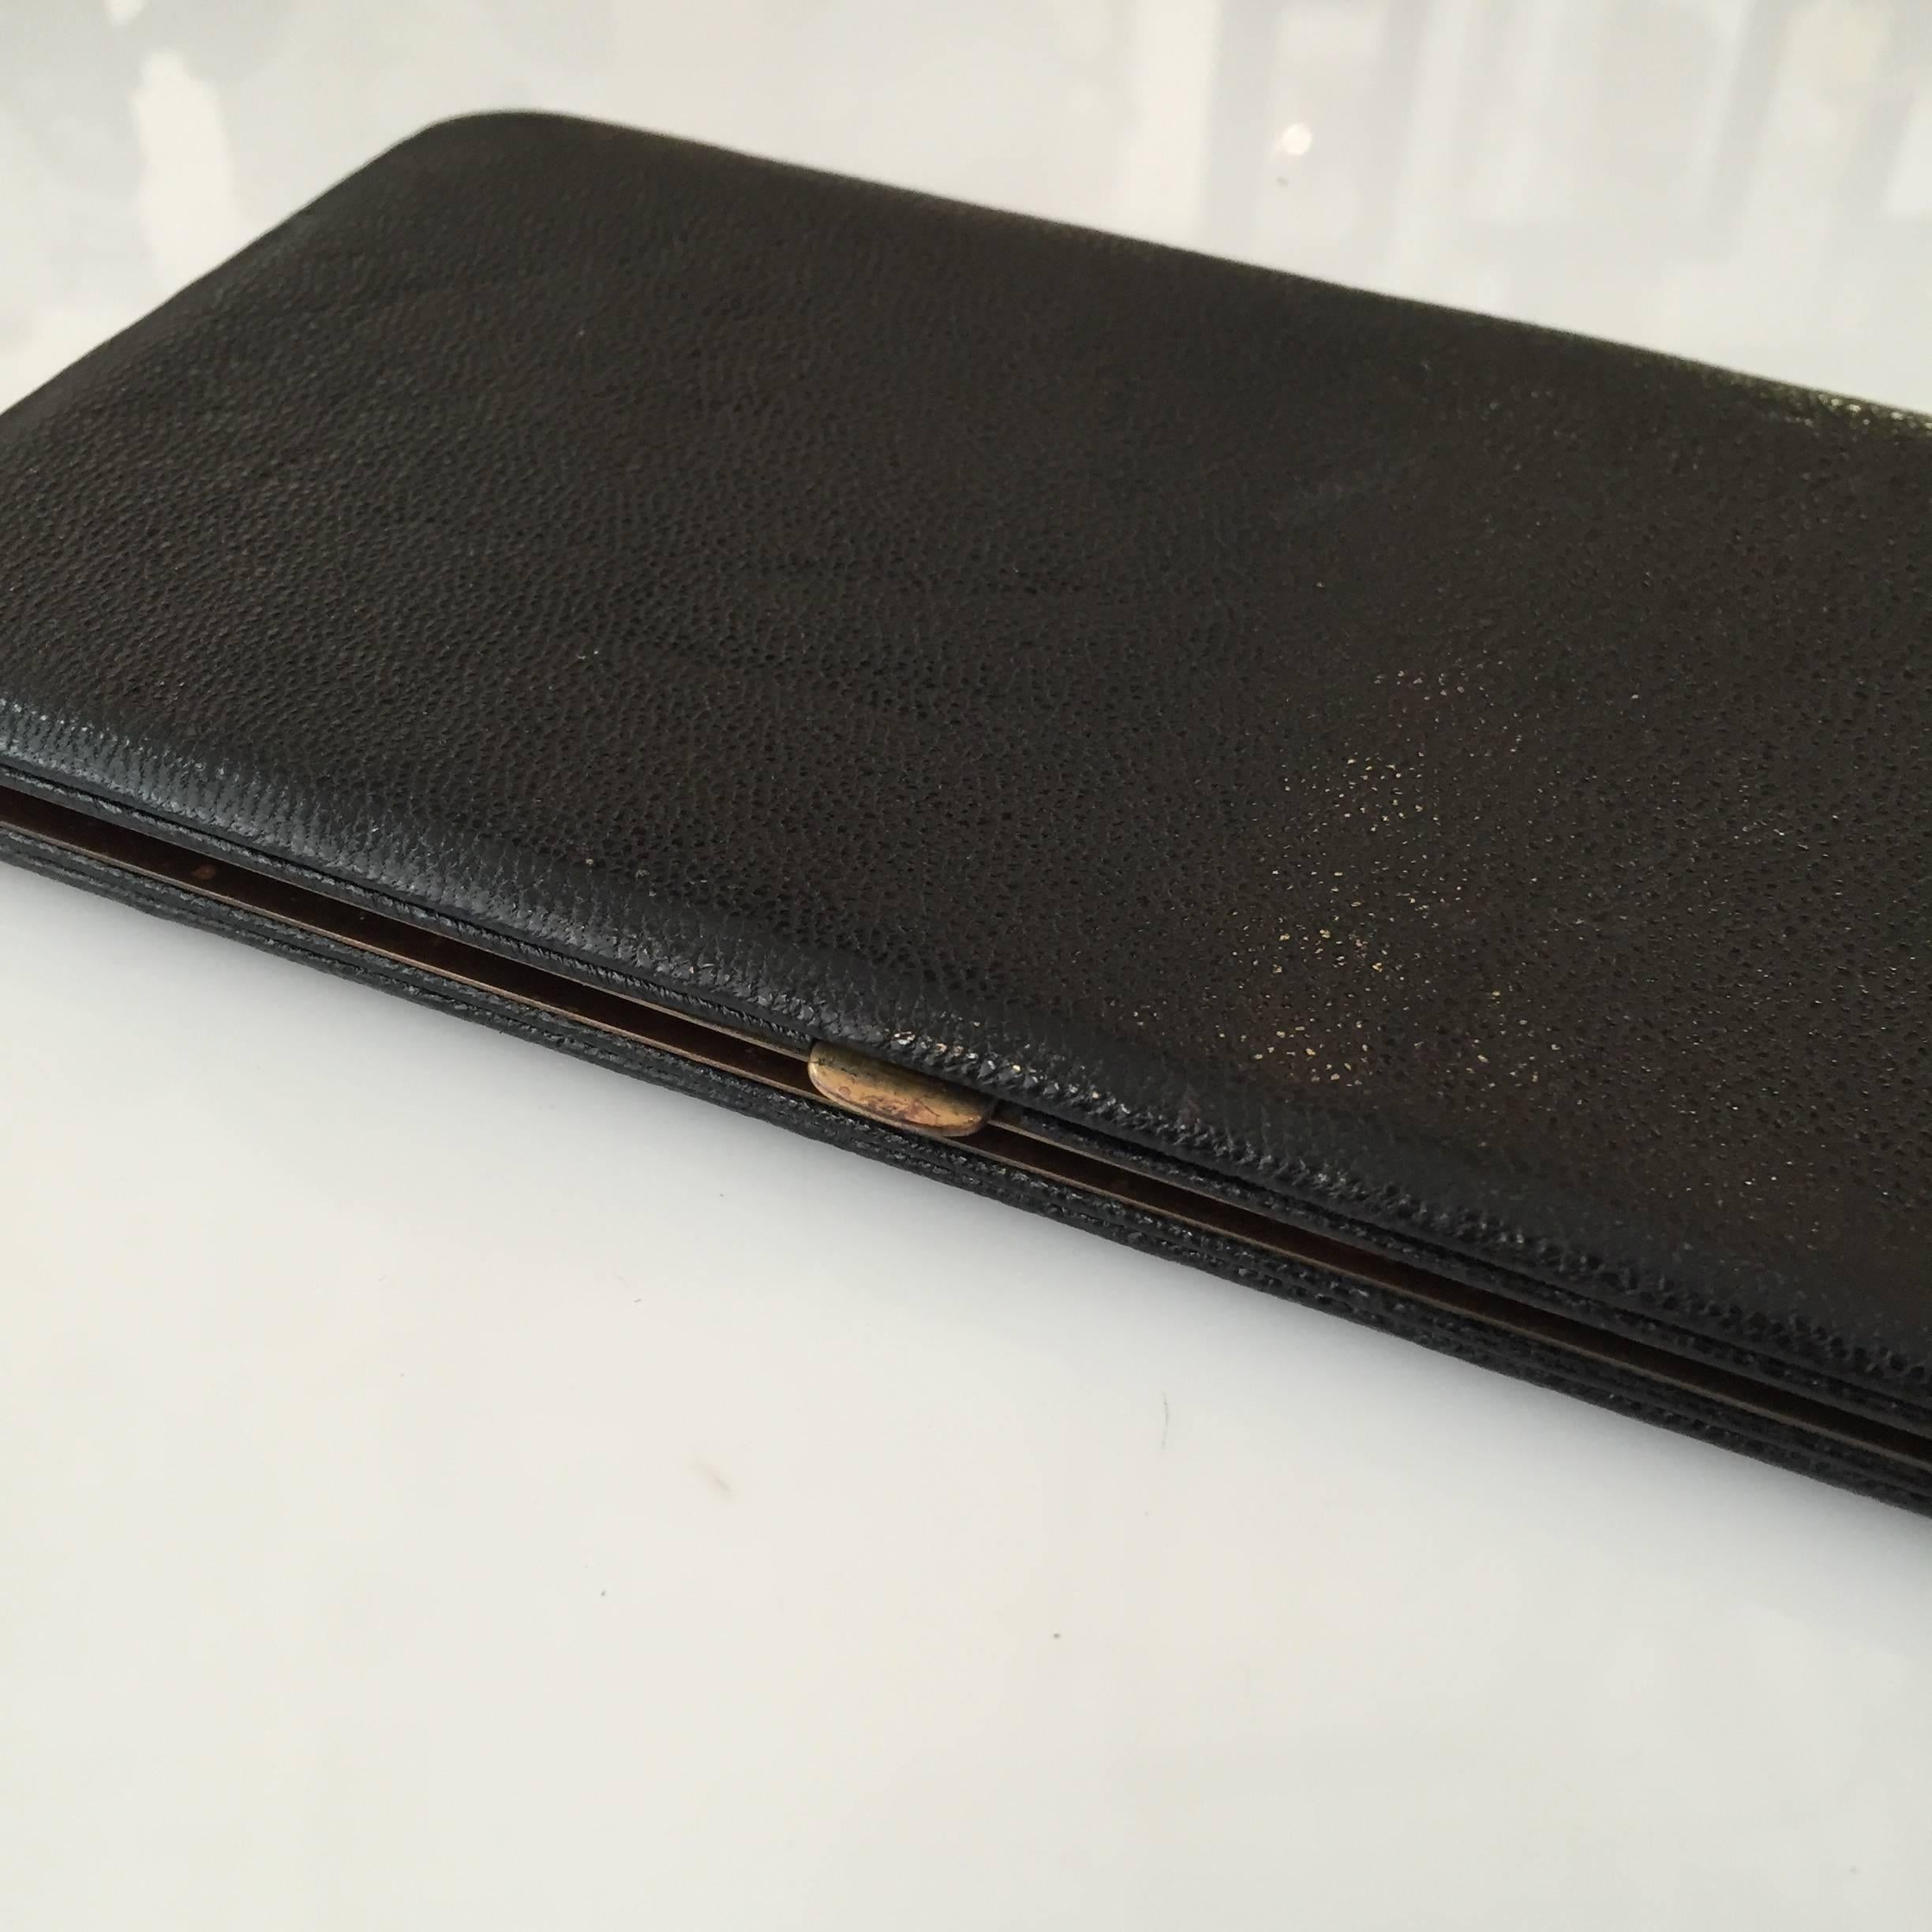 Leather Dunhill cigarette case in a pocket book style.

Measures: 4